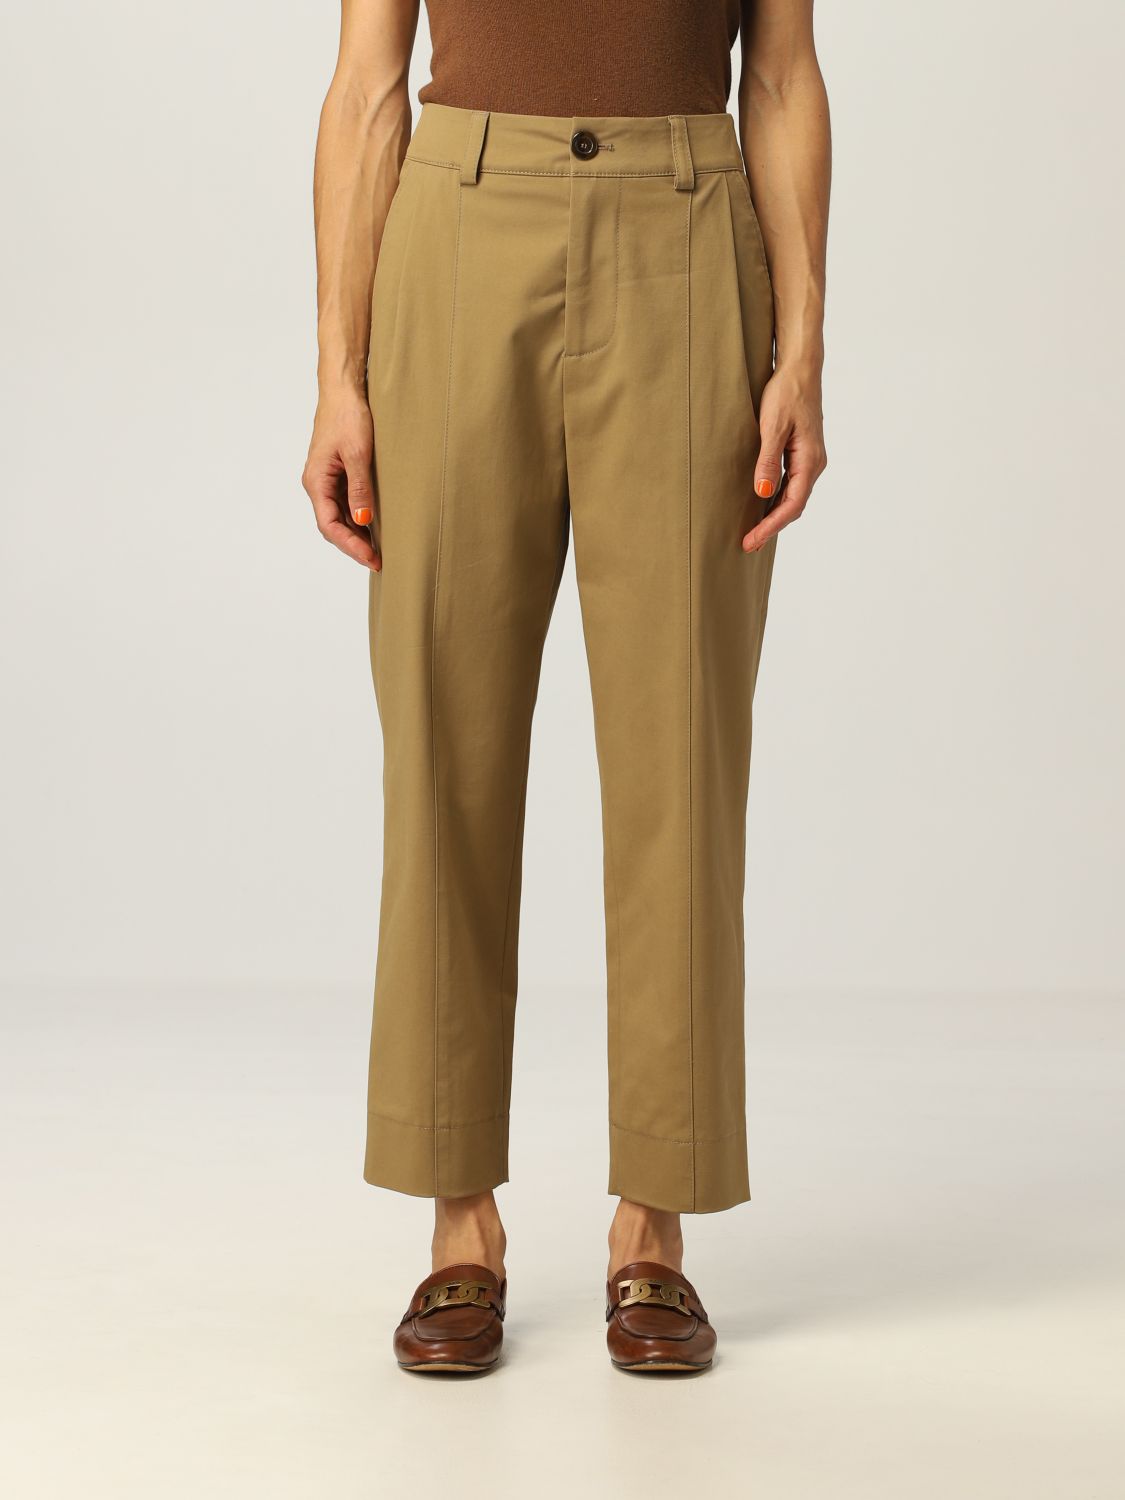 SEE BY CHLOÉ: tailored pants - Amber | See By Chloé pants CHS21APA18061 ...